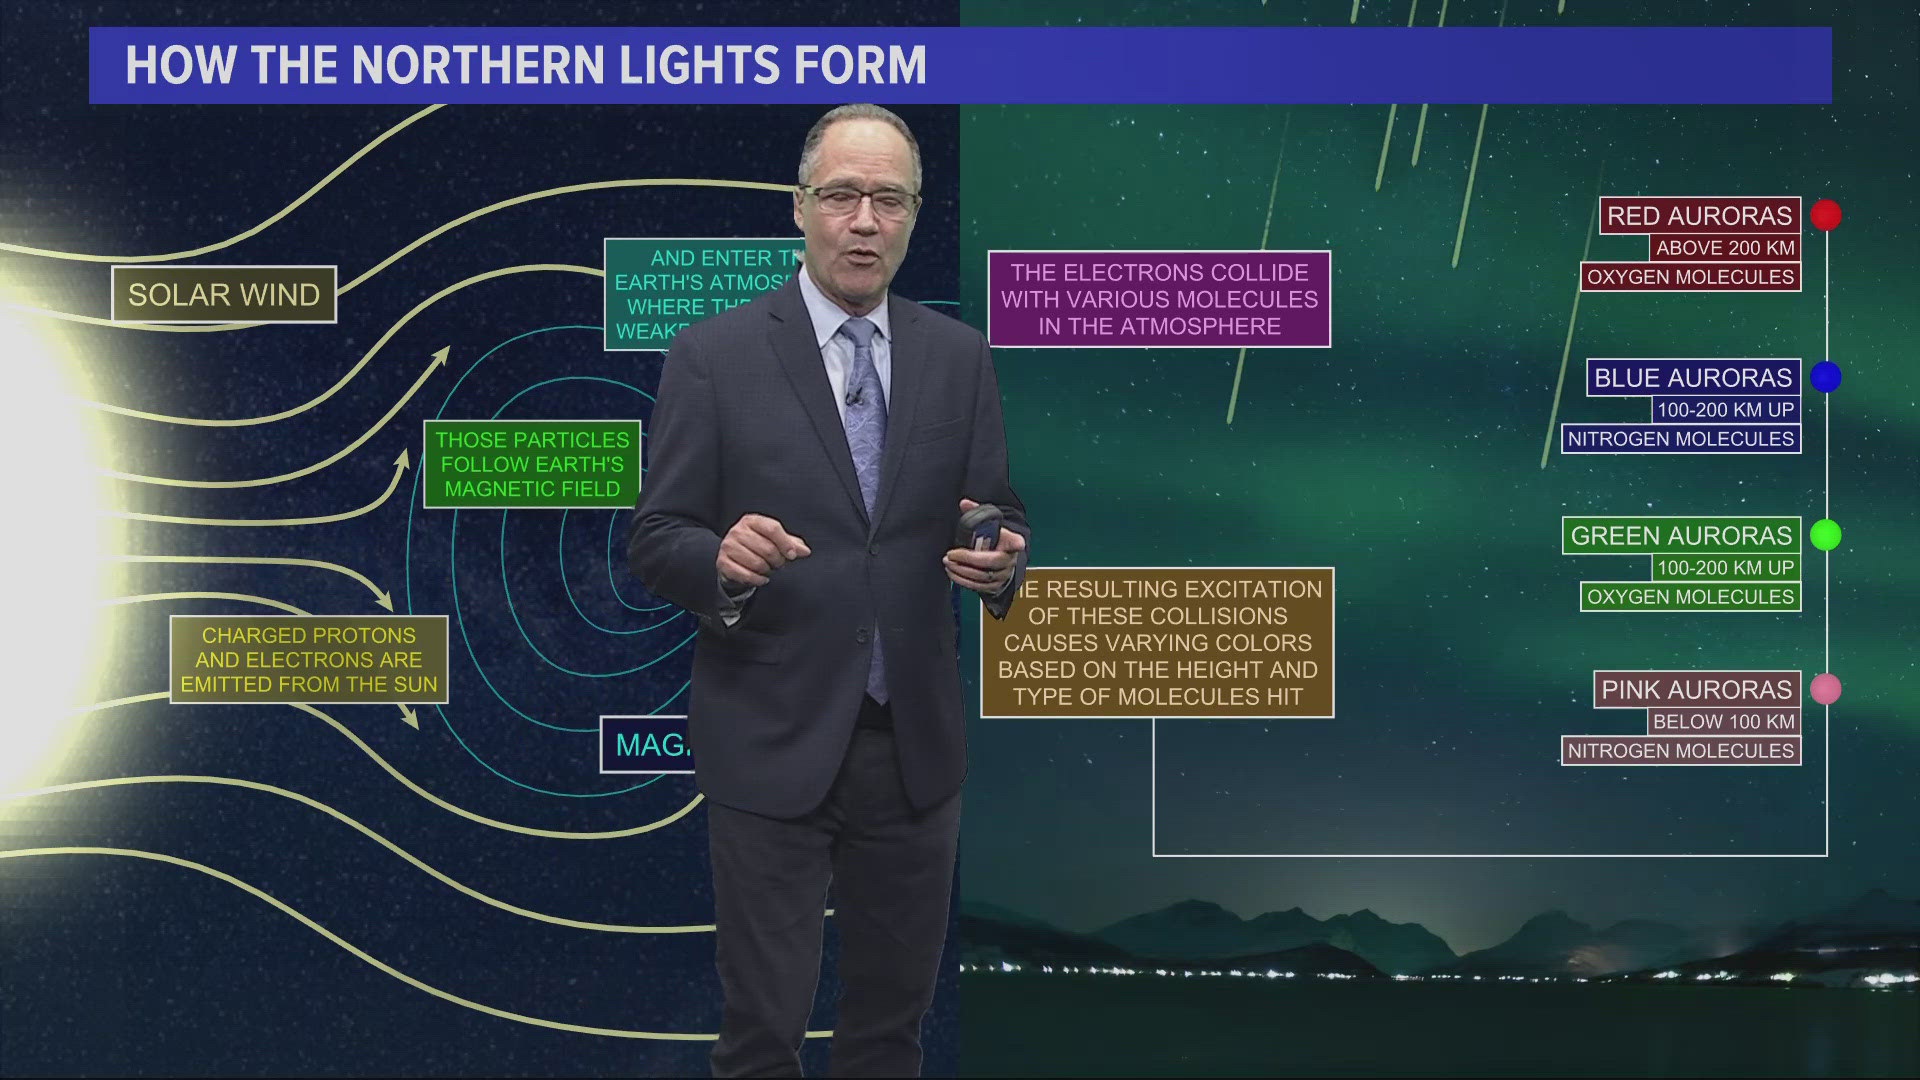 The Northern Lights may be seen in Oregon over the next couple of days. Here's how they form and where to look in Oregon to spot them.